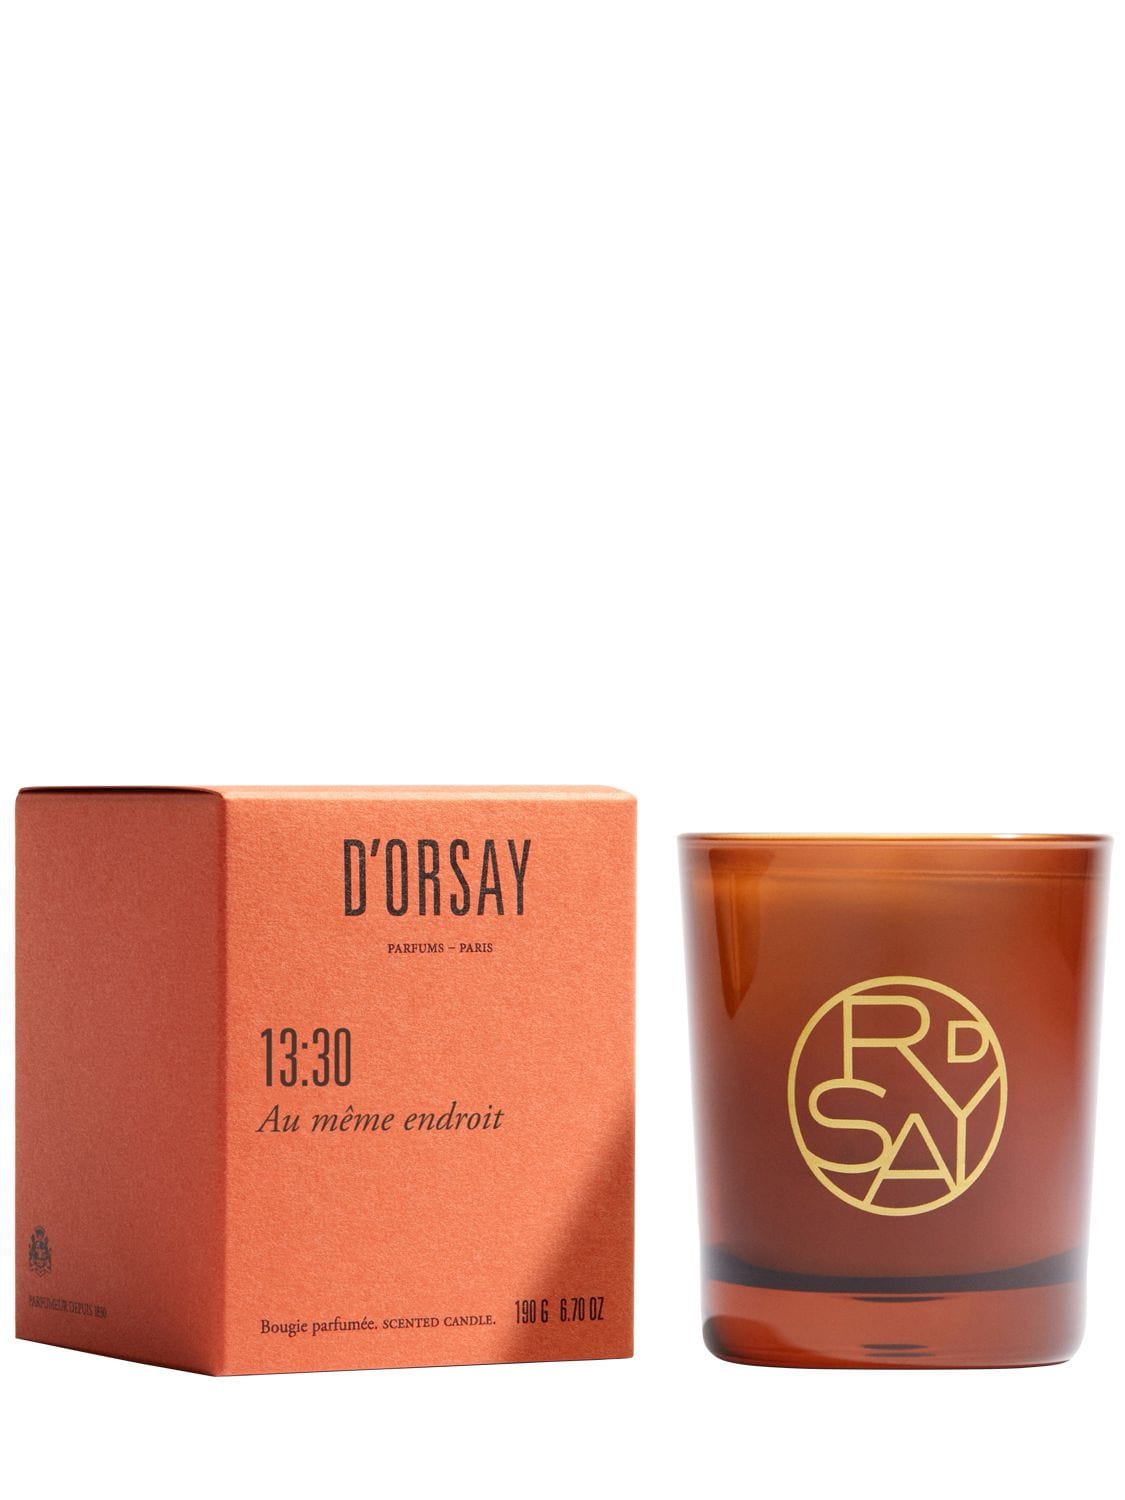 Shop D'orsay 190gr Dorsay 13:30 Candle In Brown